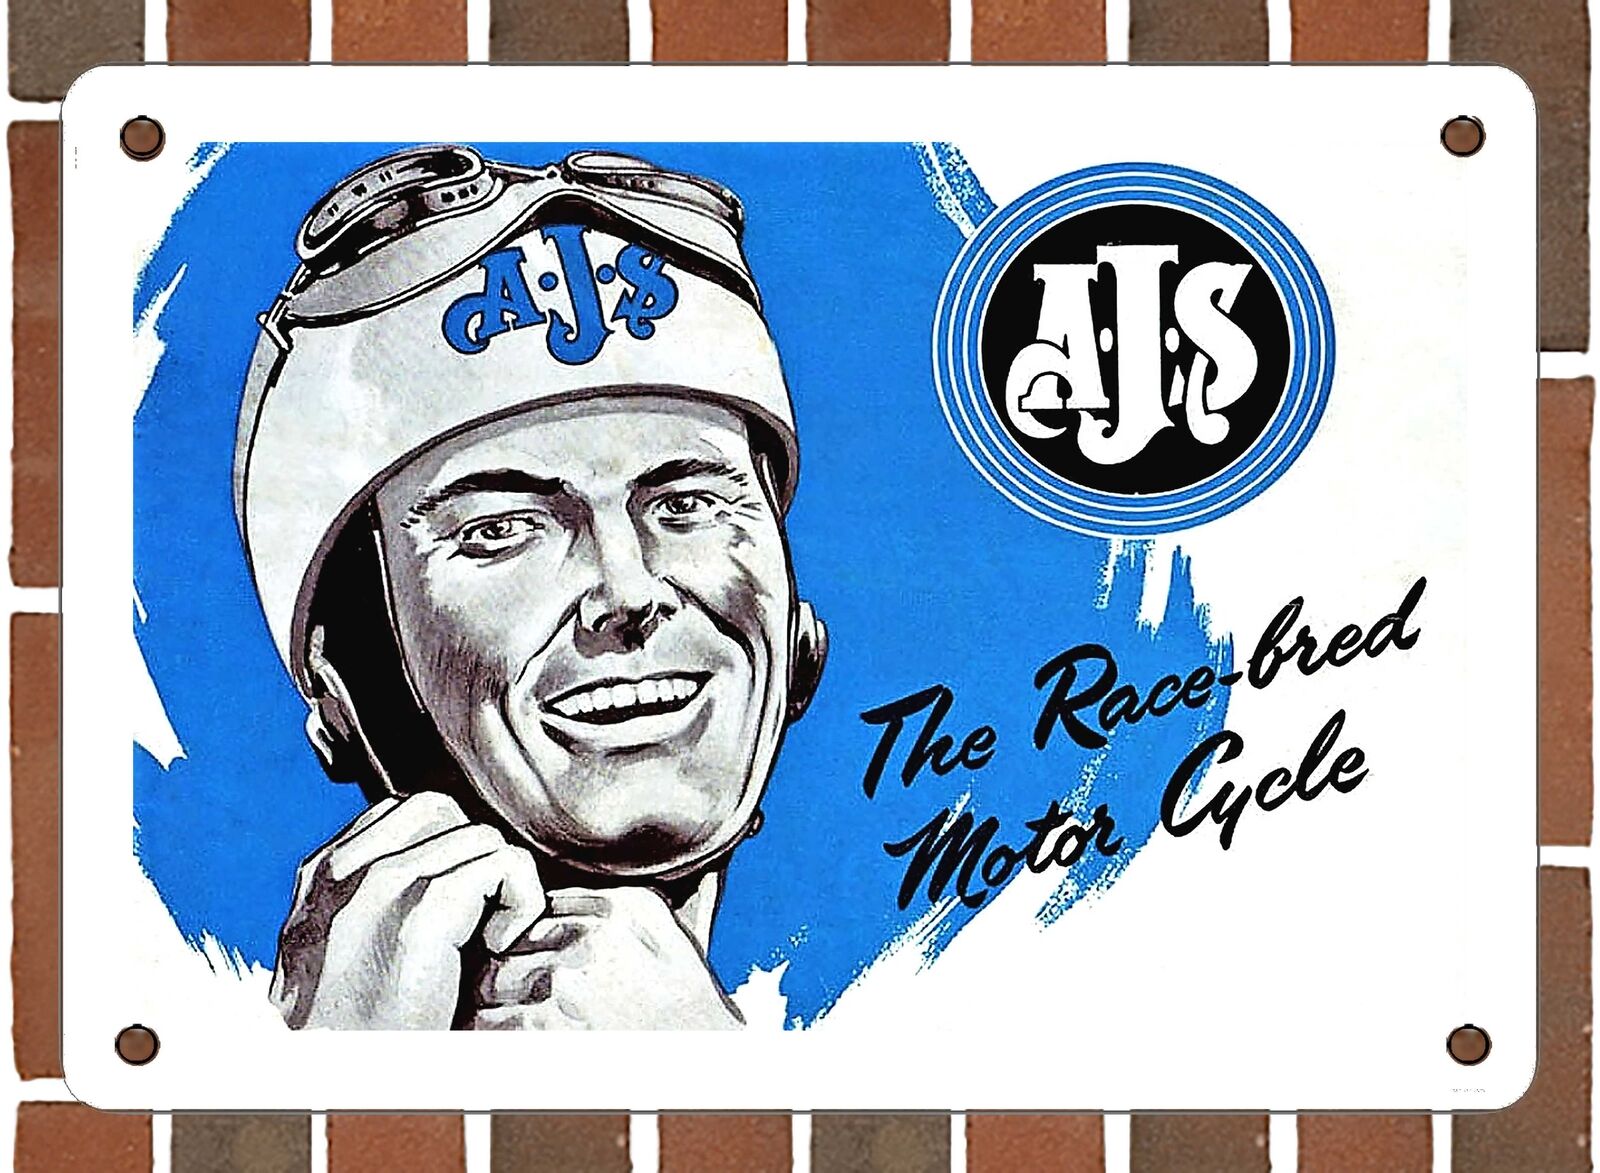 METAL SIGN - 1957 AJs the Race Bred Motorcycle - 10x14 Inches